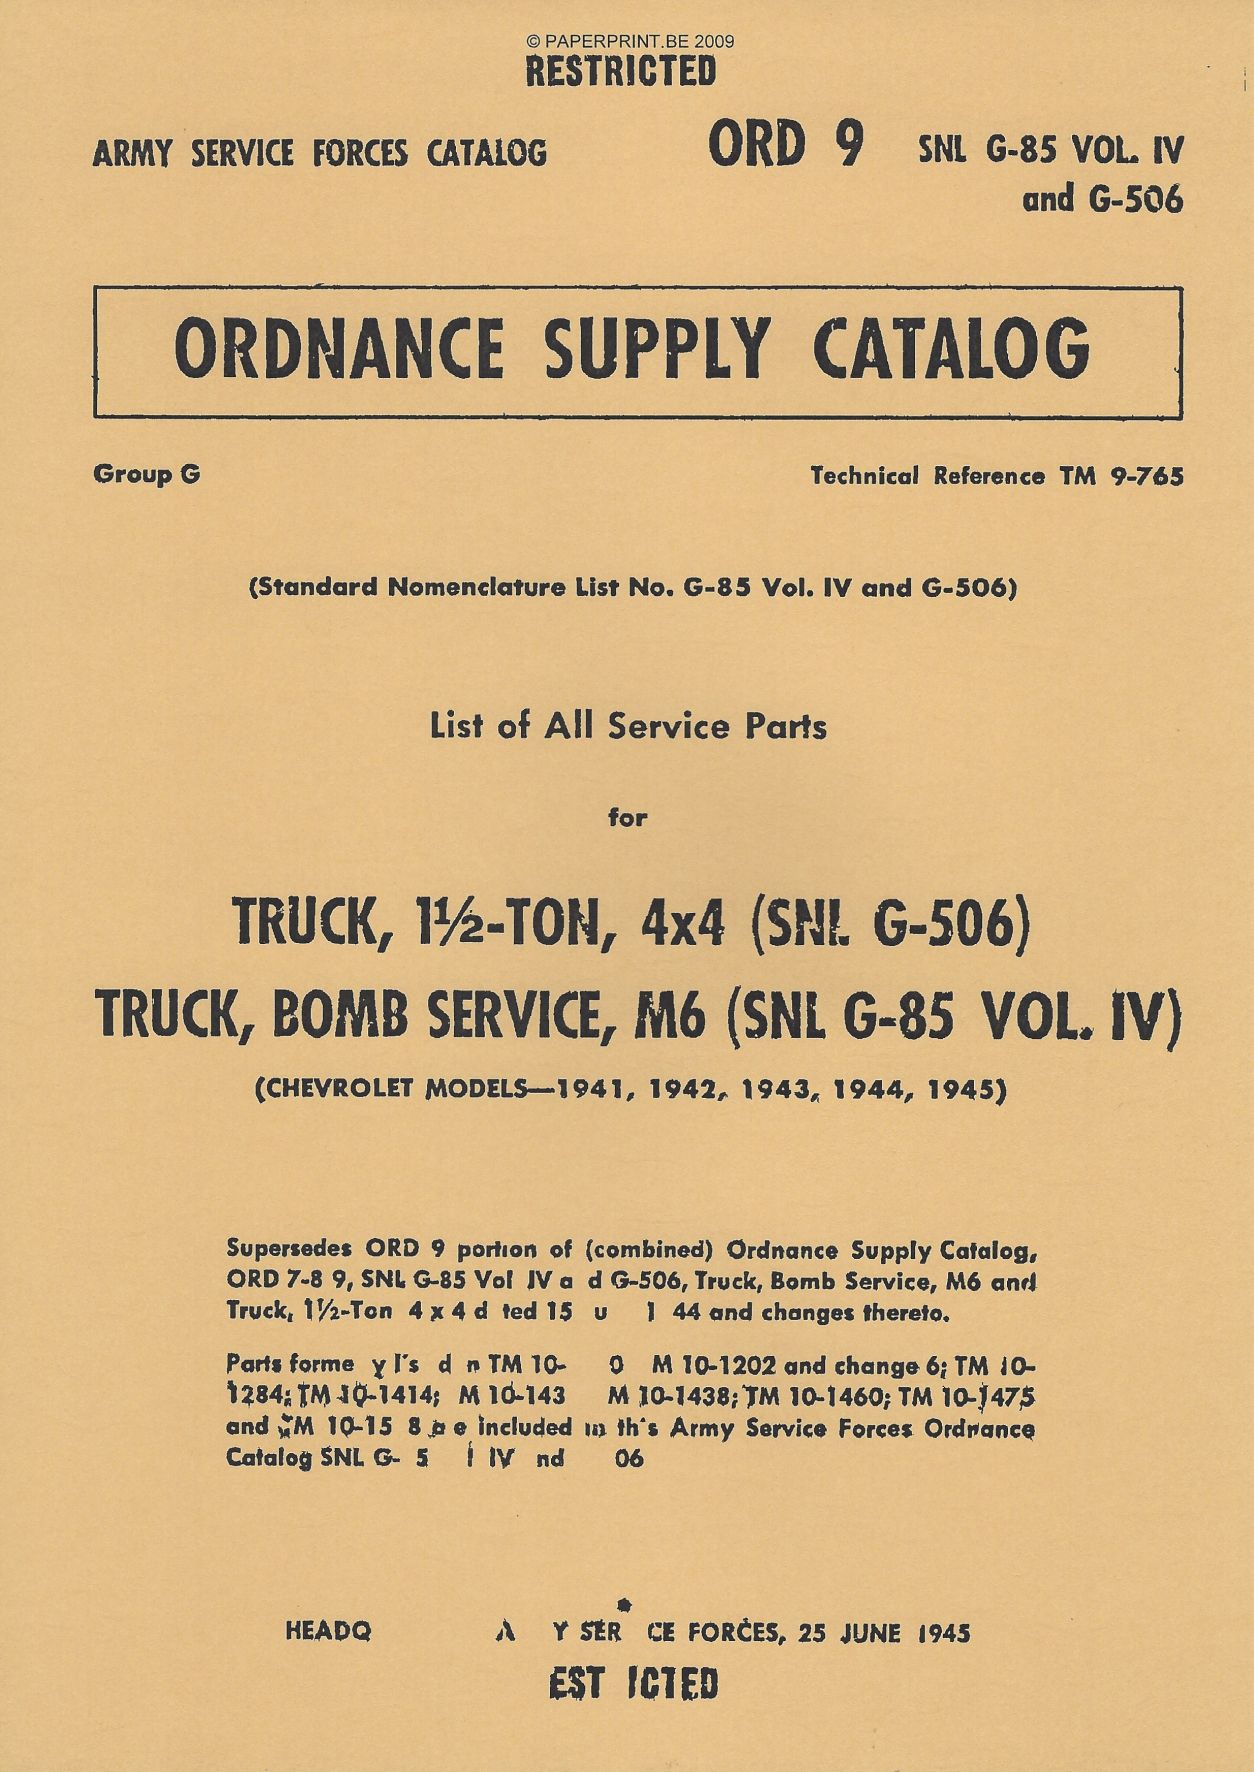 SNL G-85 AND G-506 PARTS LIST FOR TRUCK, 1 ½ - TON, 4 x 4 (SNL G-506) AND TRUCK, BOMB SERVICE, M6 (SNL G-85 VOL. IV)